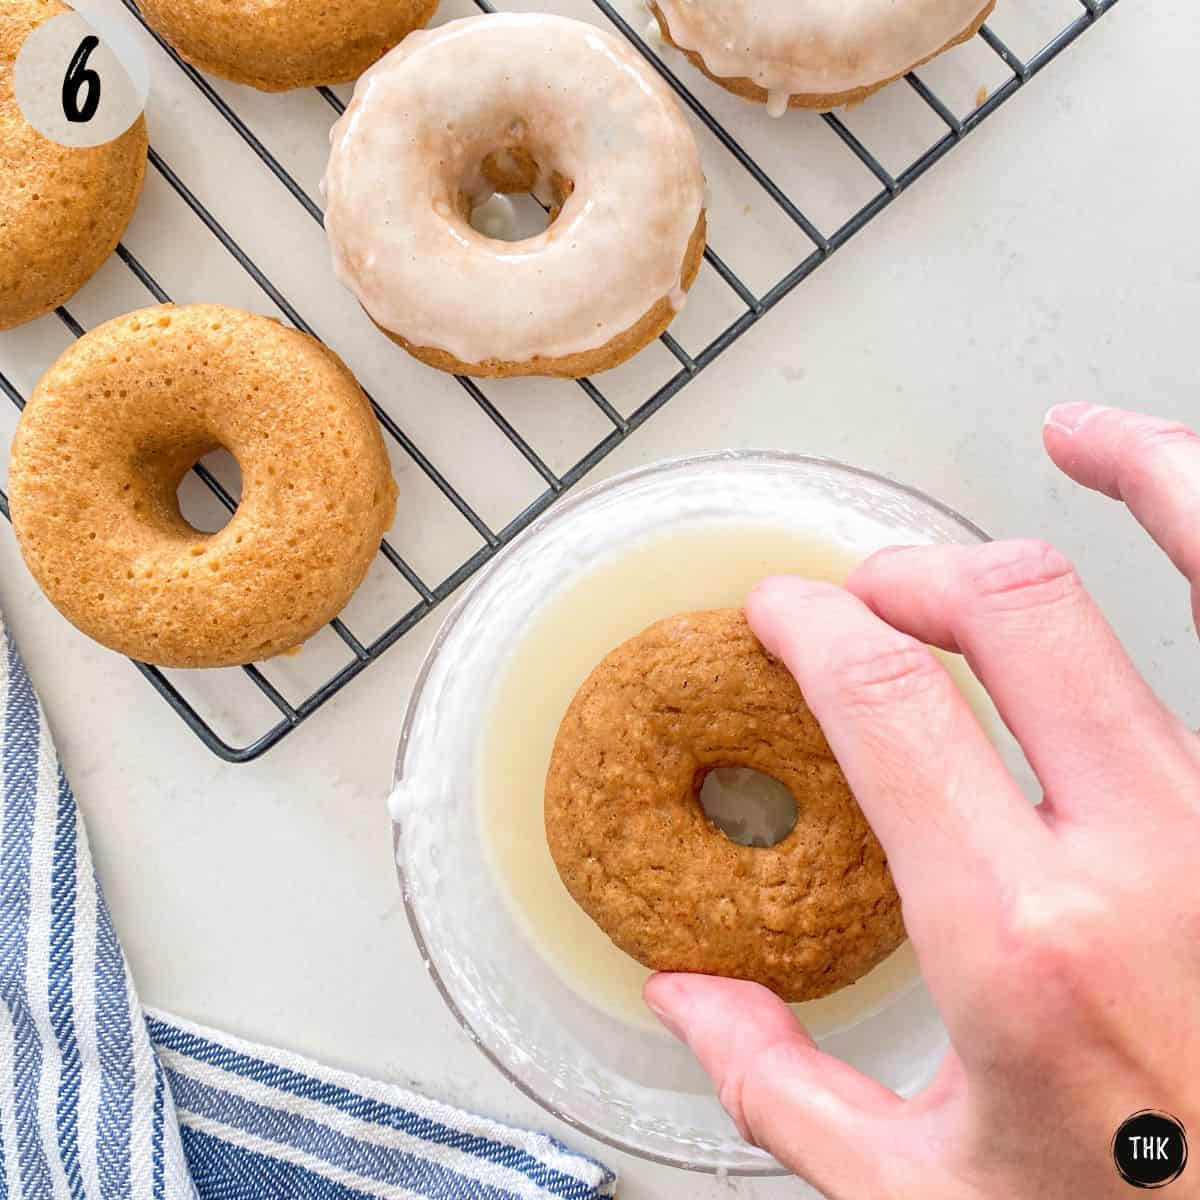 Donut being dipped into bowl of glaze.